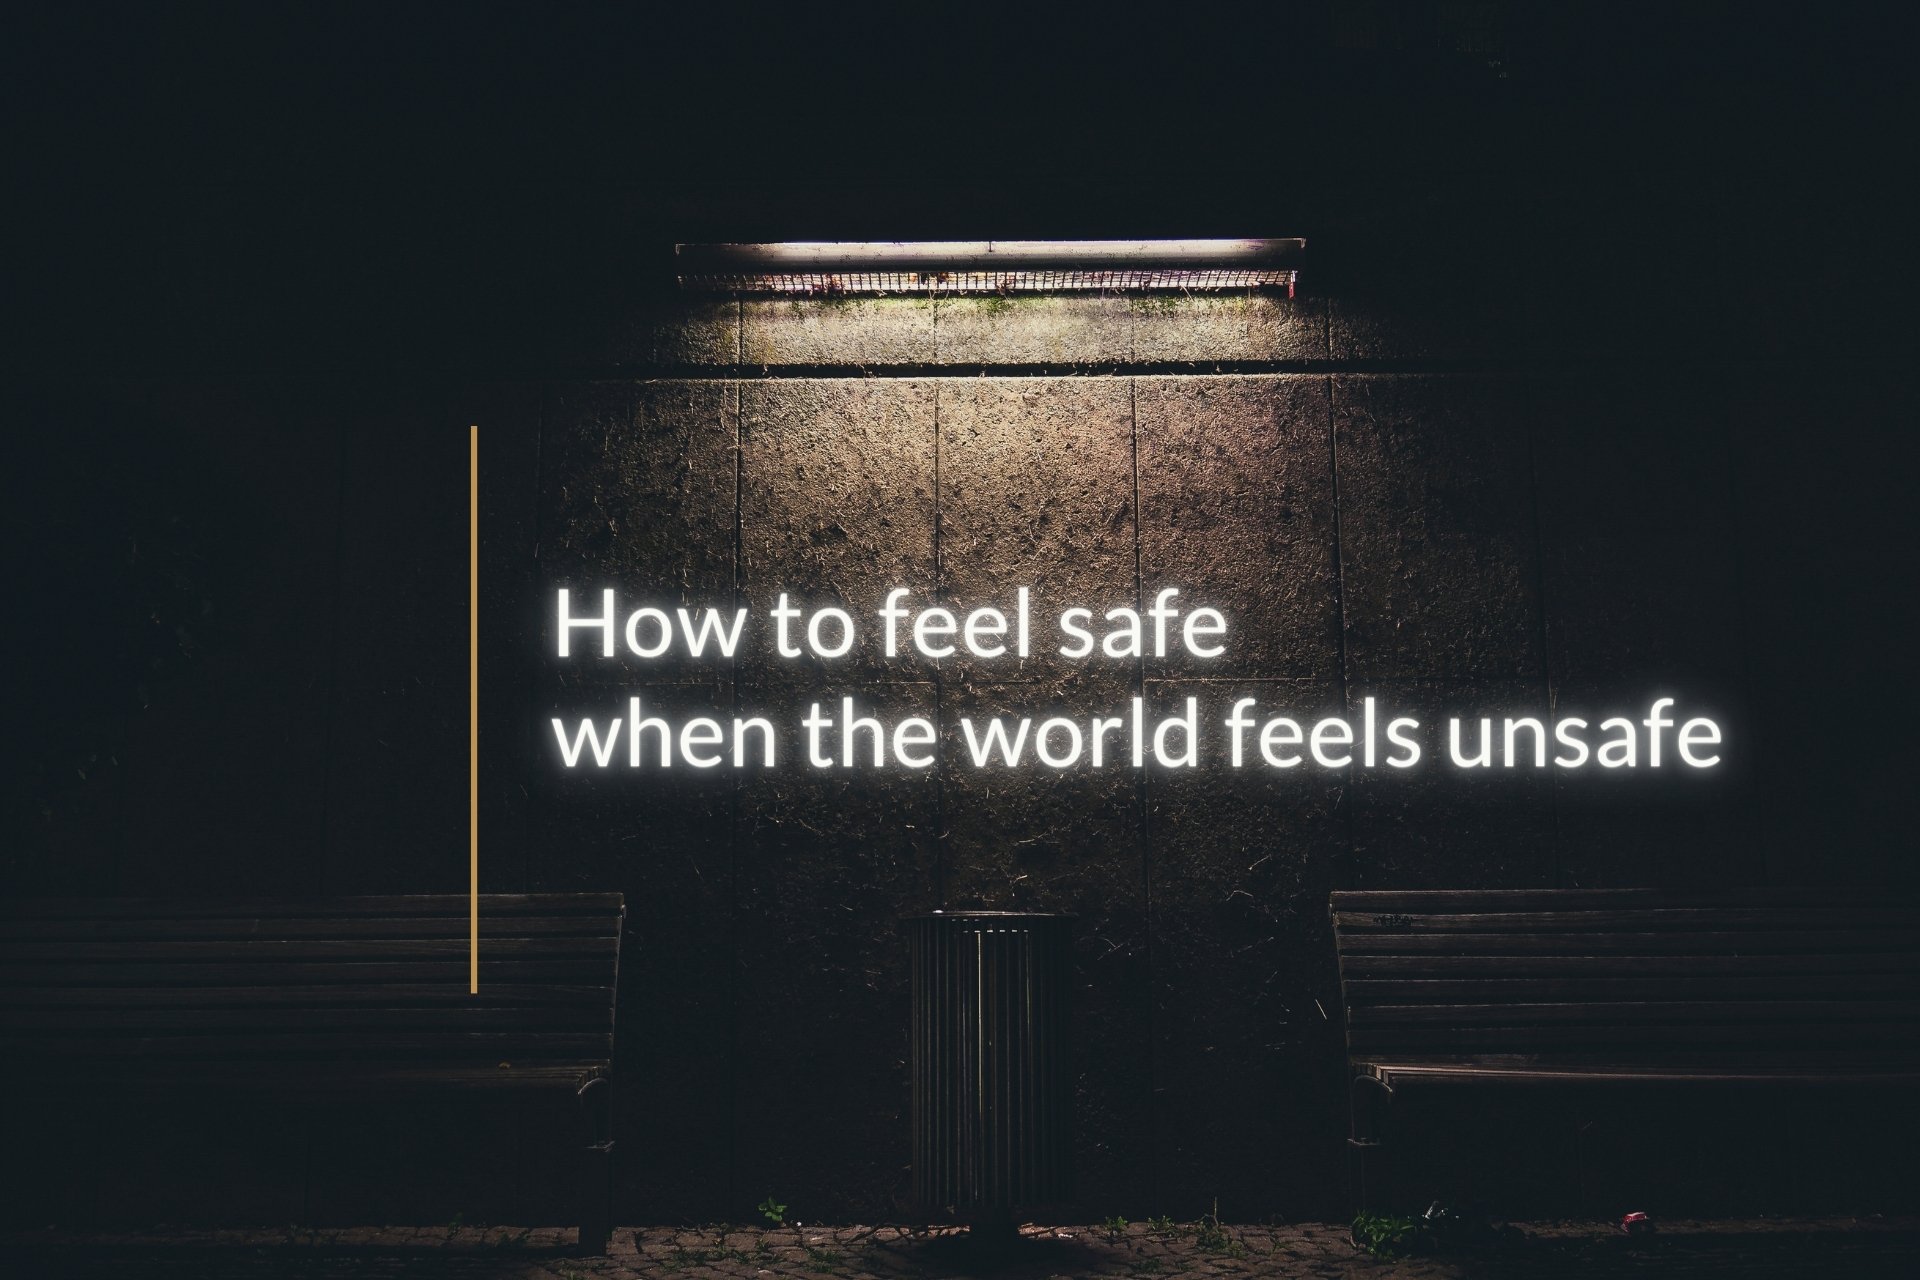 How to feel safe when the world feels unsafe